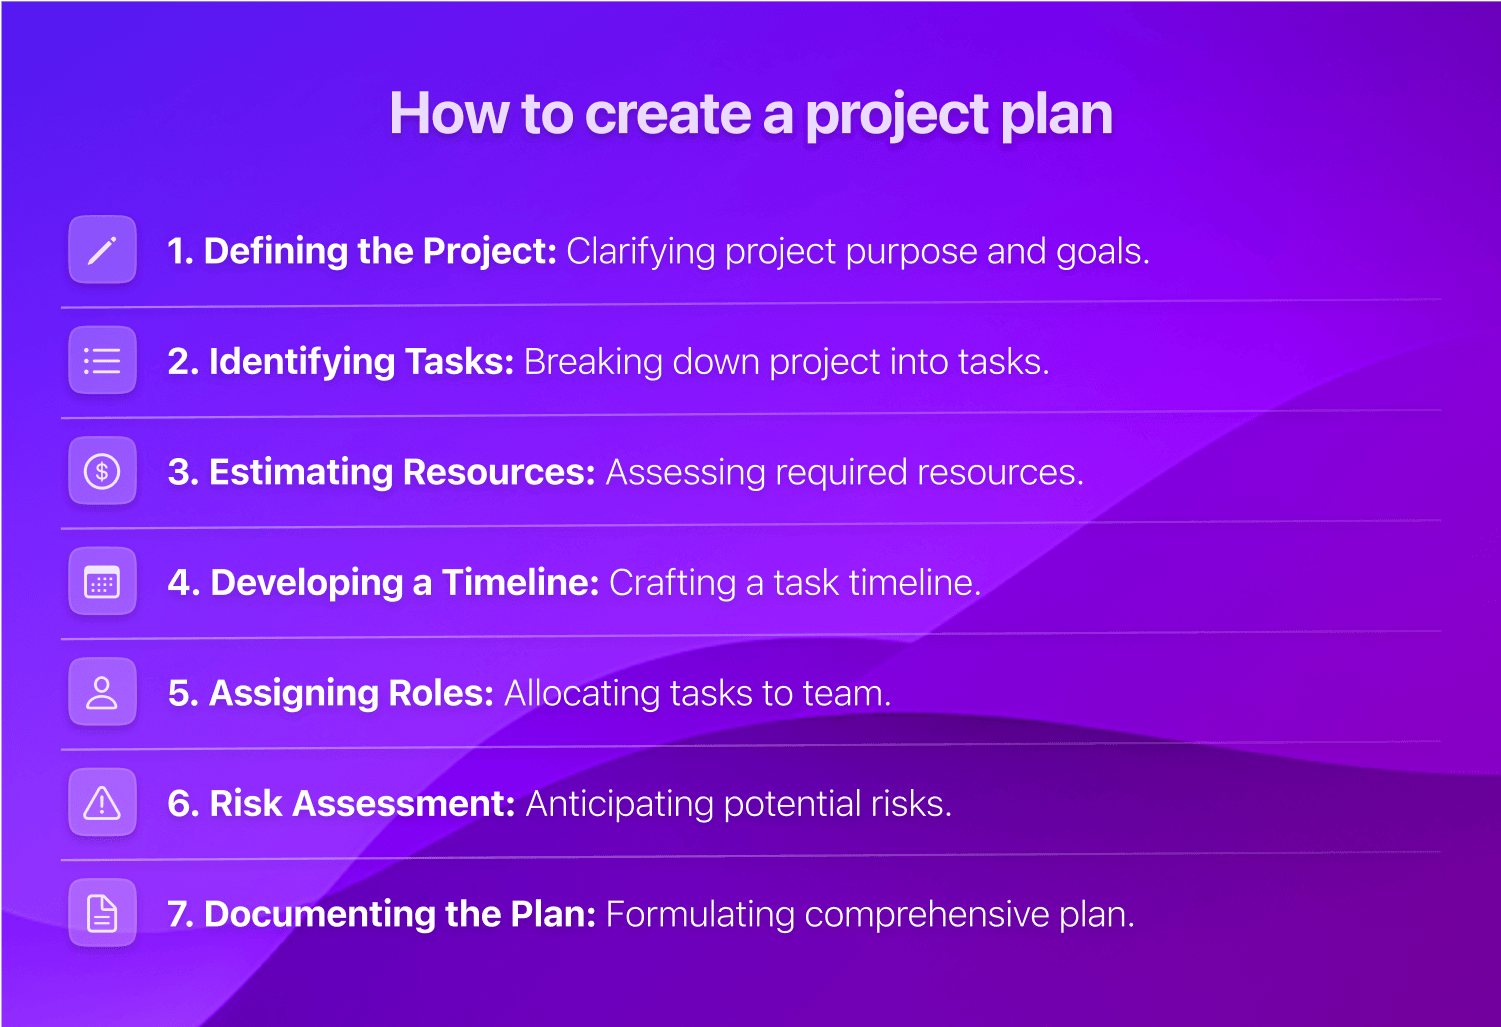 Infographic of the 7 steps to creating a project plan